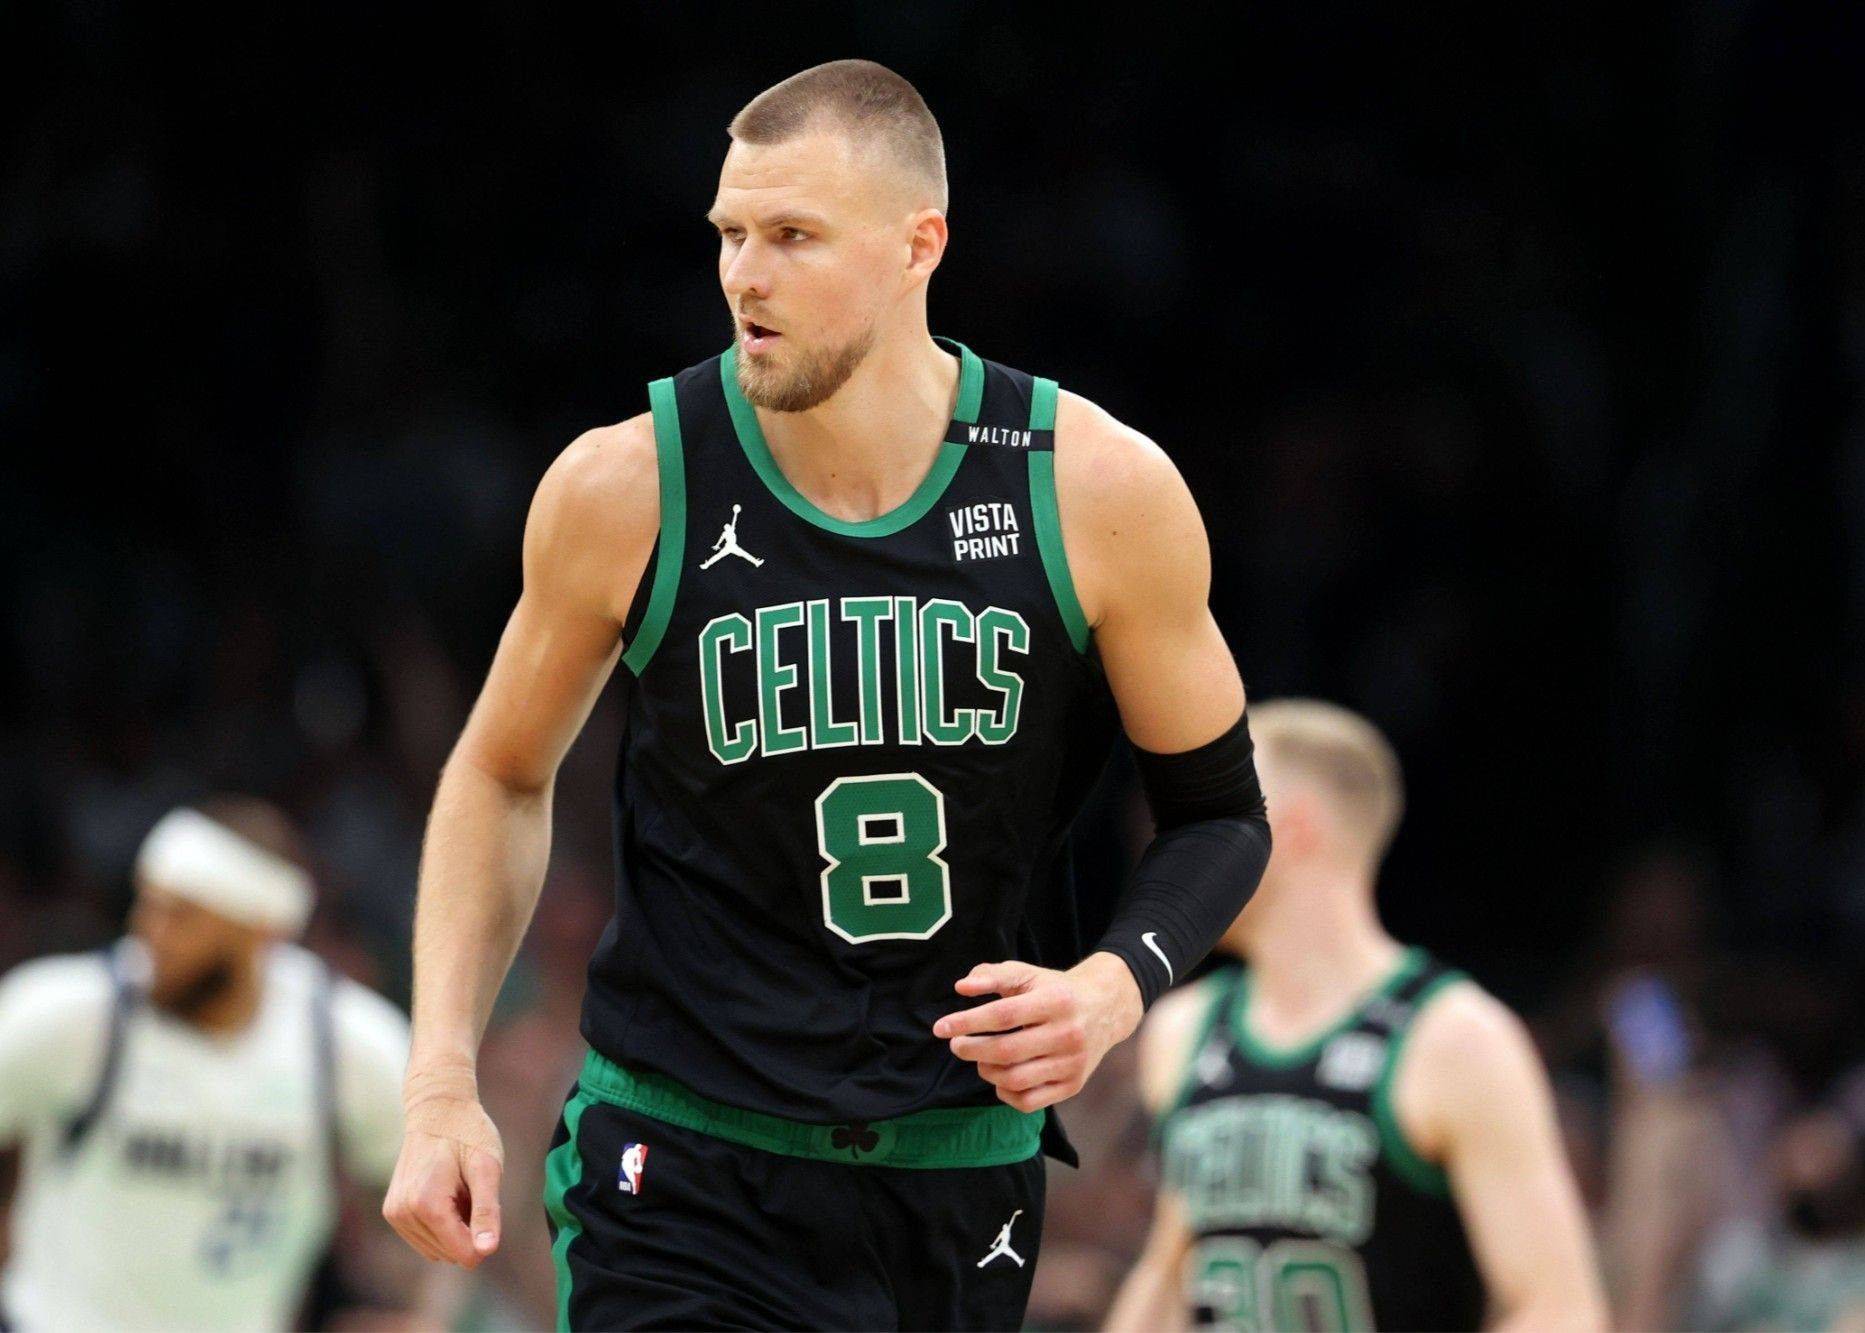 Celtics Official: Porzingis upgraded to questionable for Game 4 of the Finals tomorrow